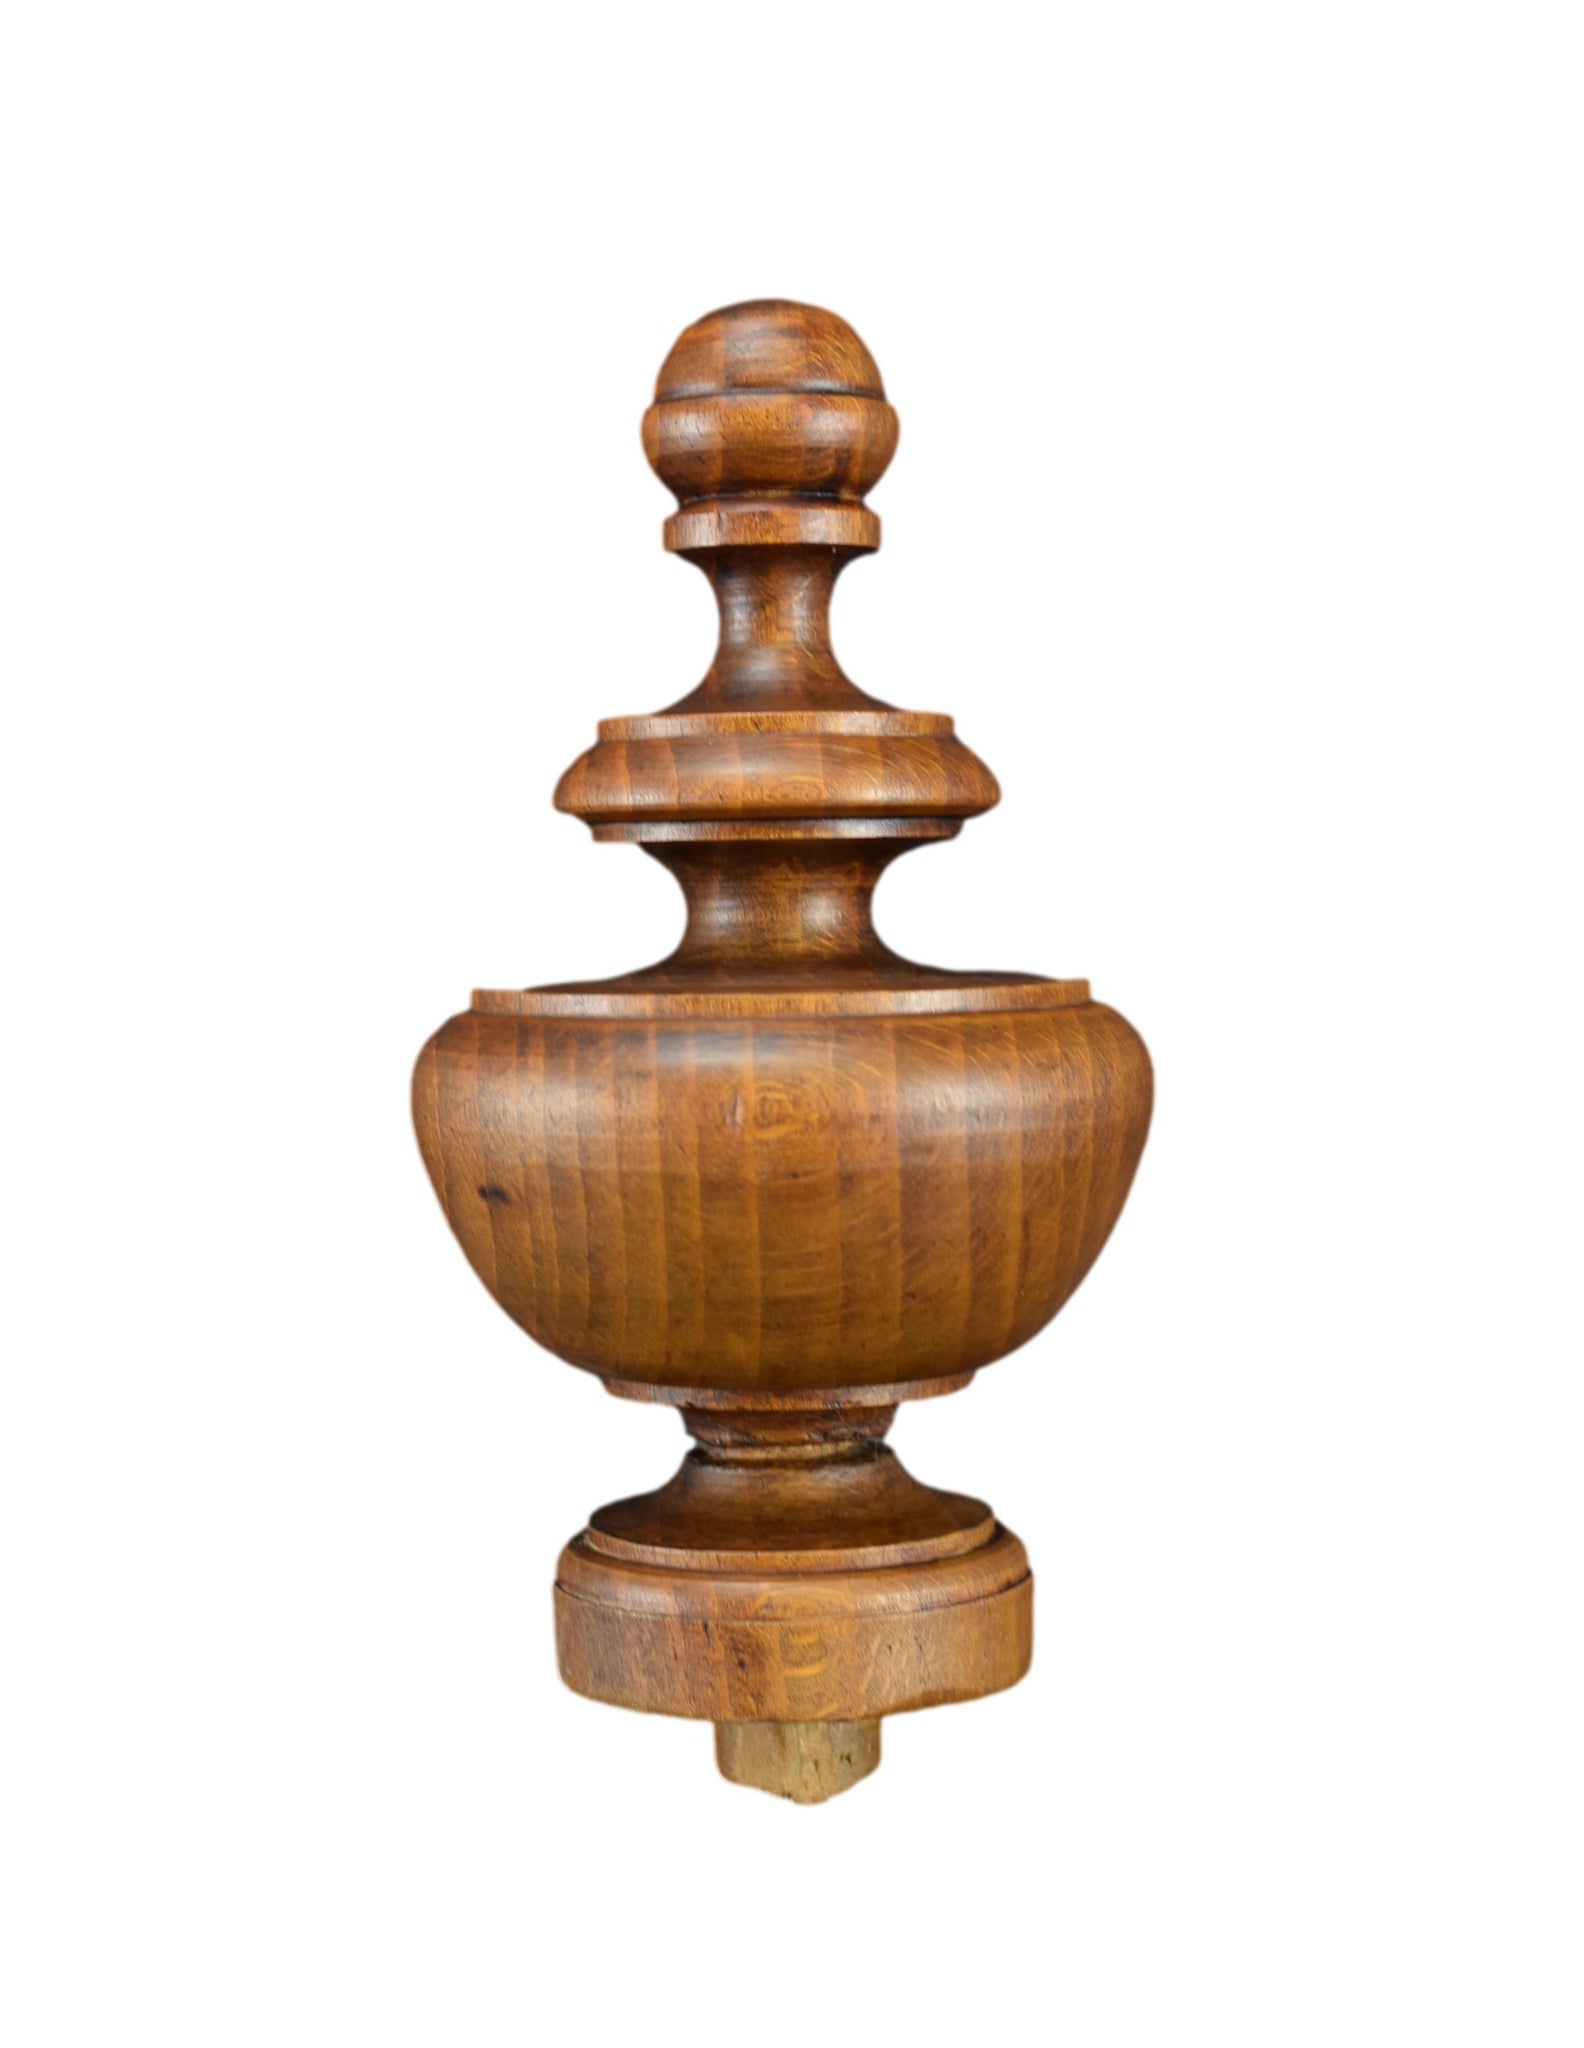 7 5/8" Wood Staircase Newel Post Cap Finial Architectural